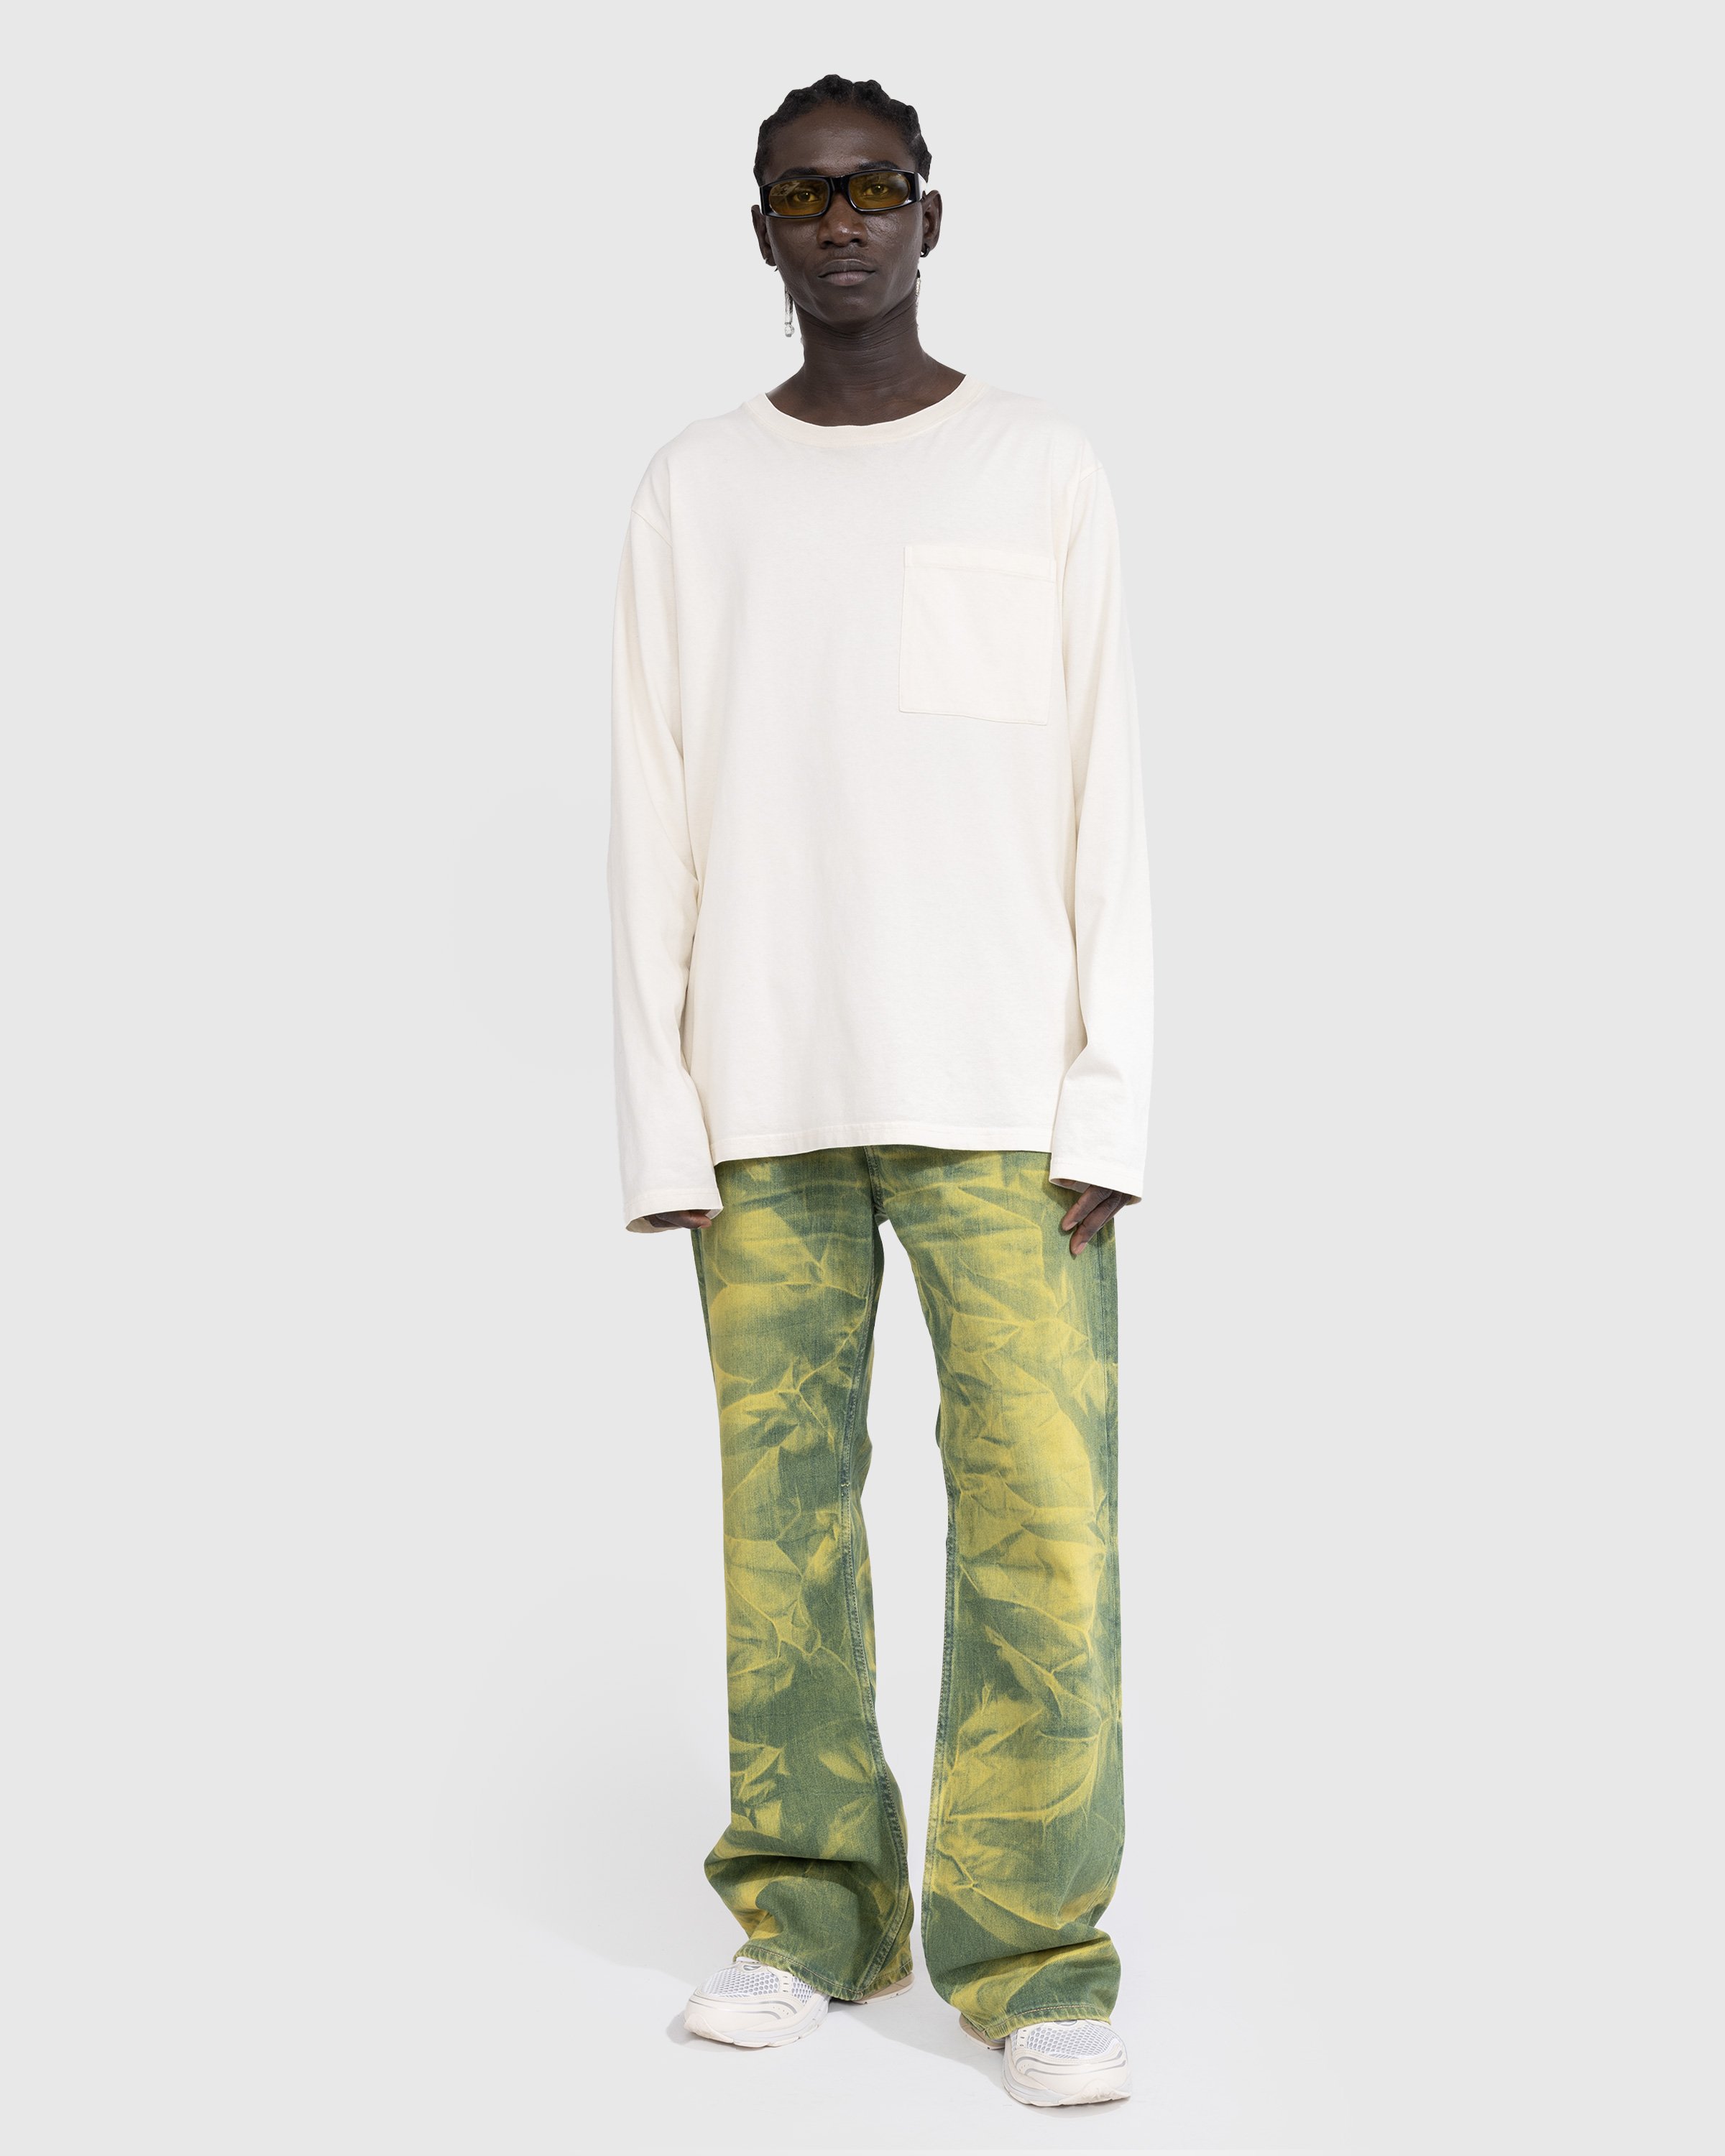 Acne Studios - Loose Fit Jeans 2021 Yellow/Blue - Clothing - Multi - Image 2